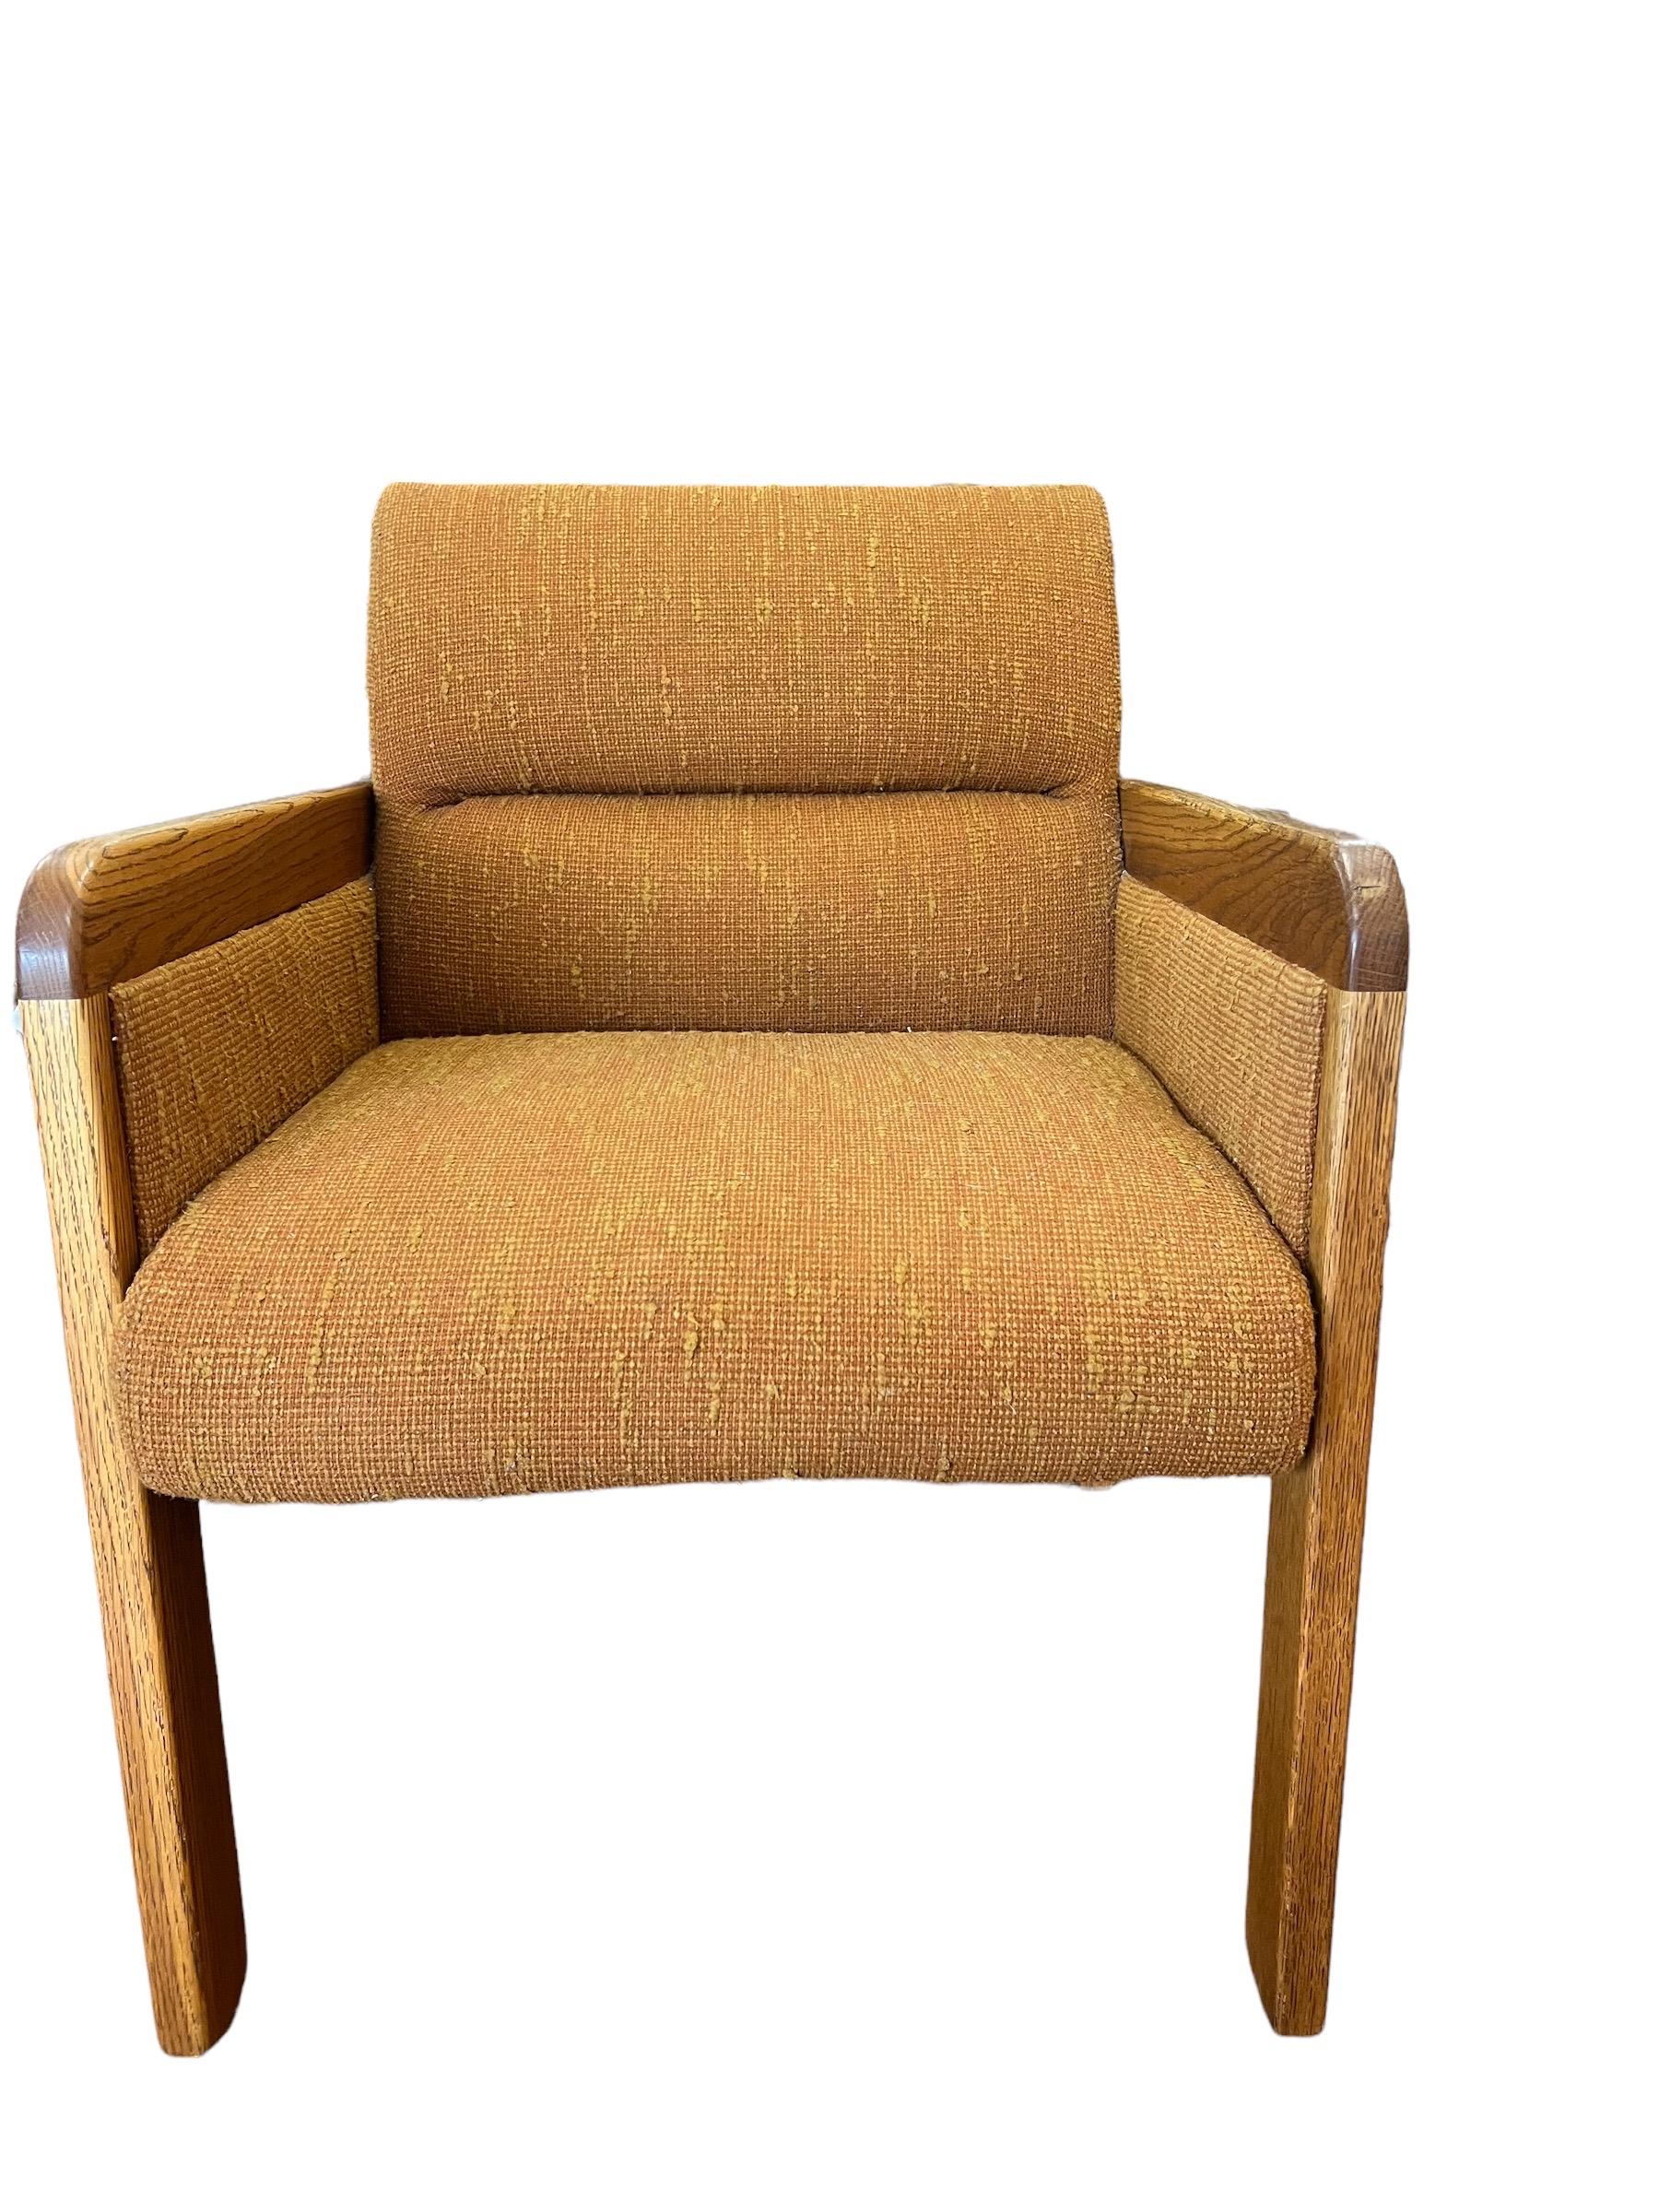 Vintage solid oak upholstered Mid-Century Modern sofa chair with original vintage upholstery.

Measures: 24W 28D 34H
SW 22 SD19 SH 18.